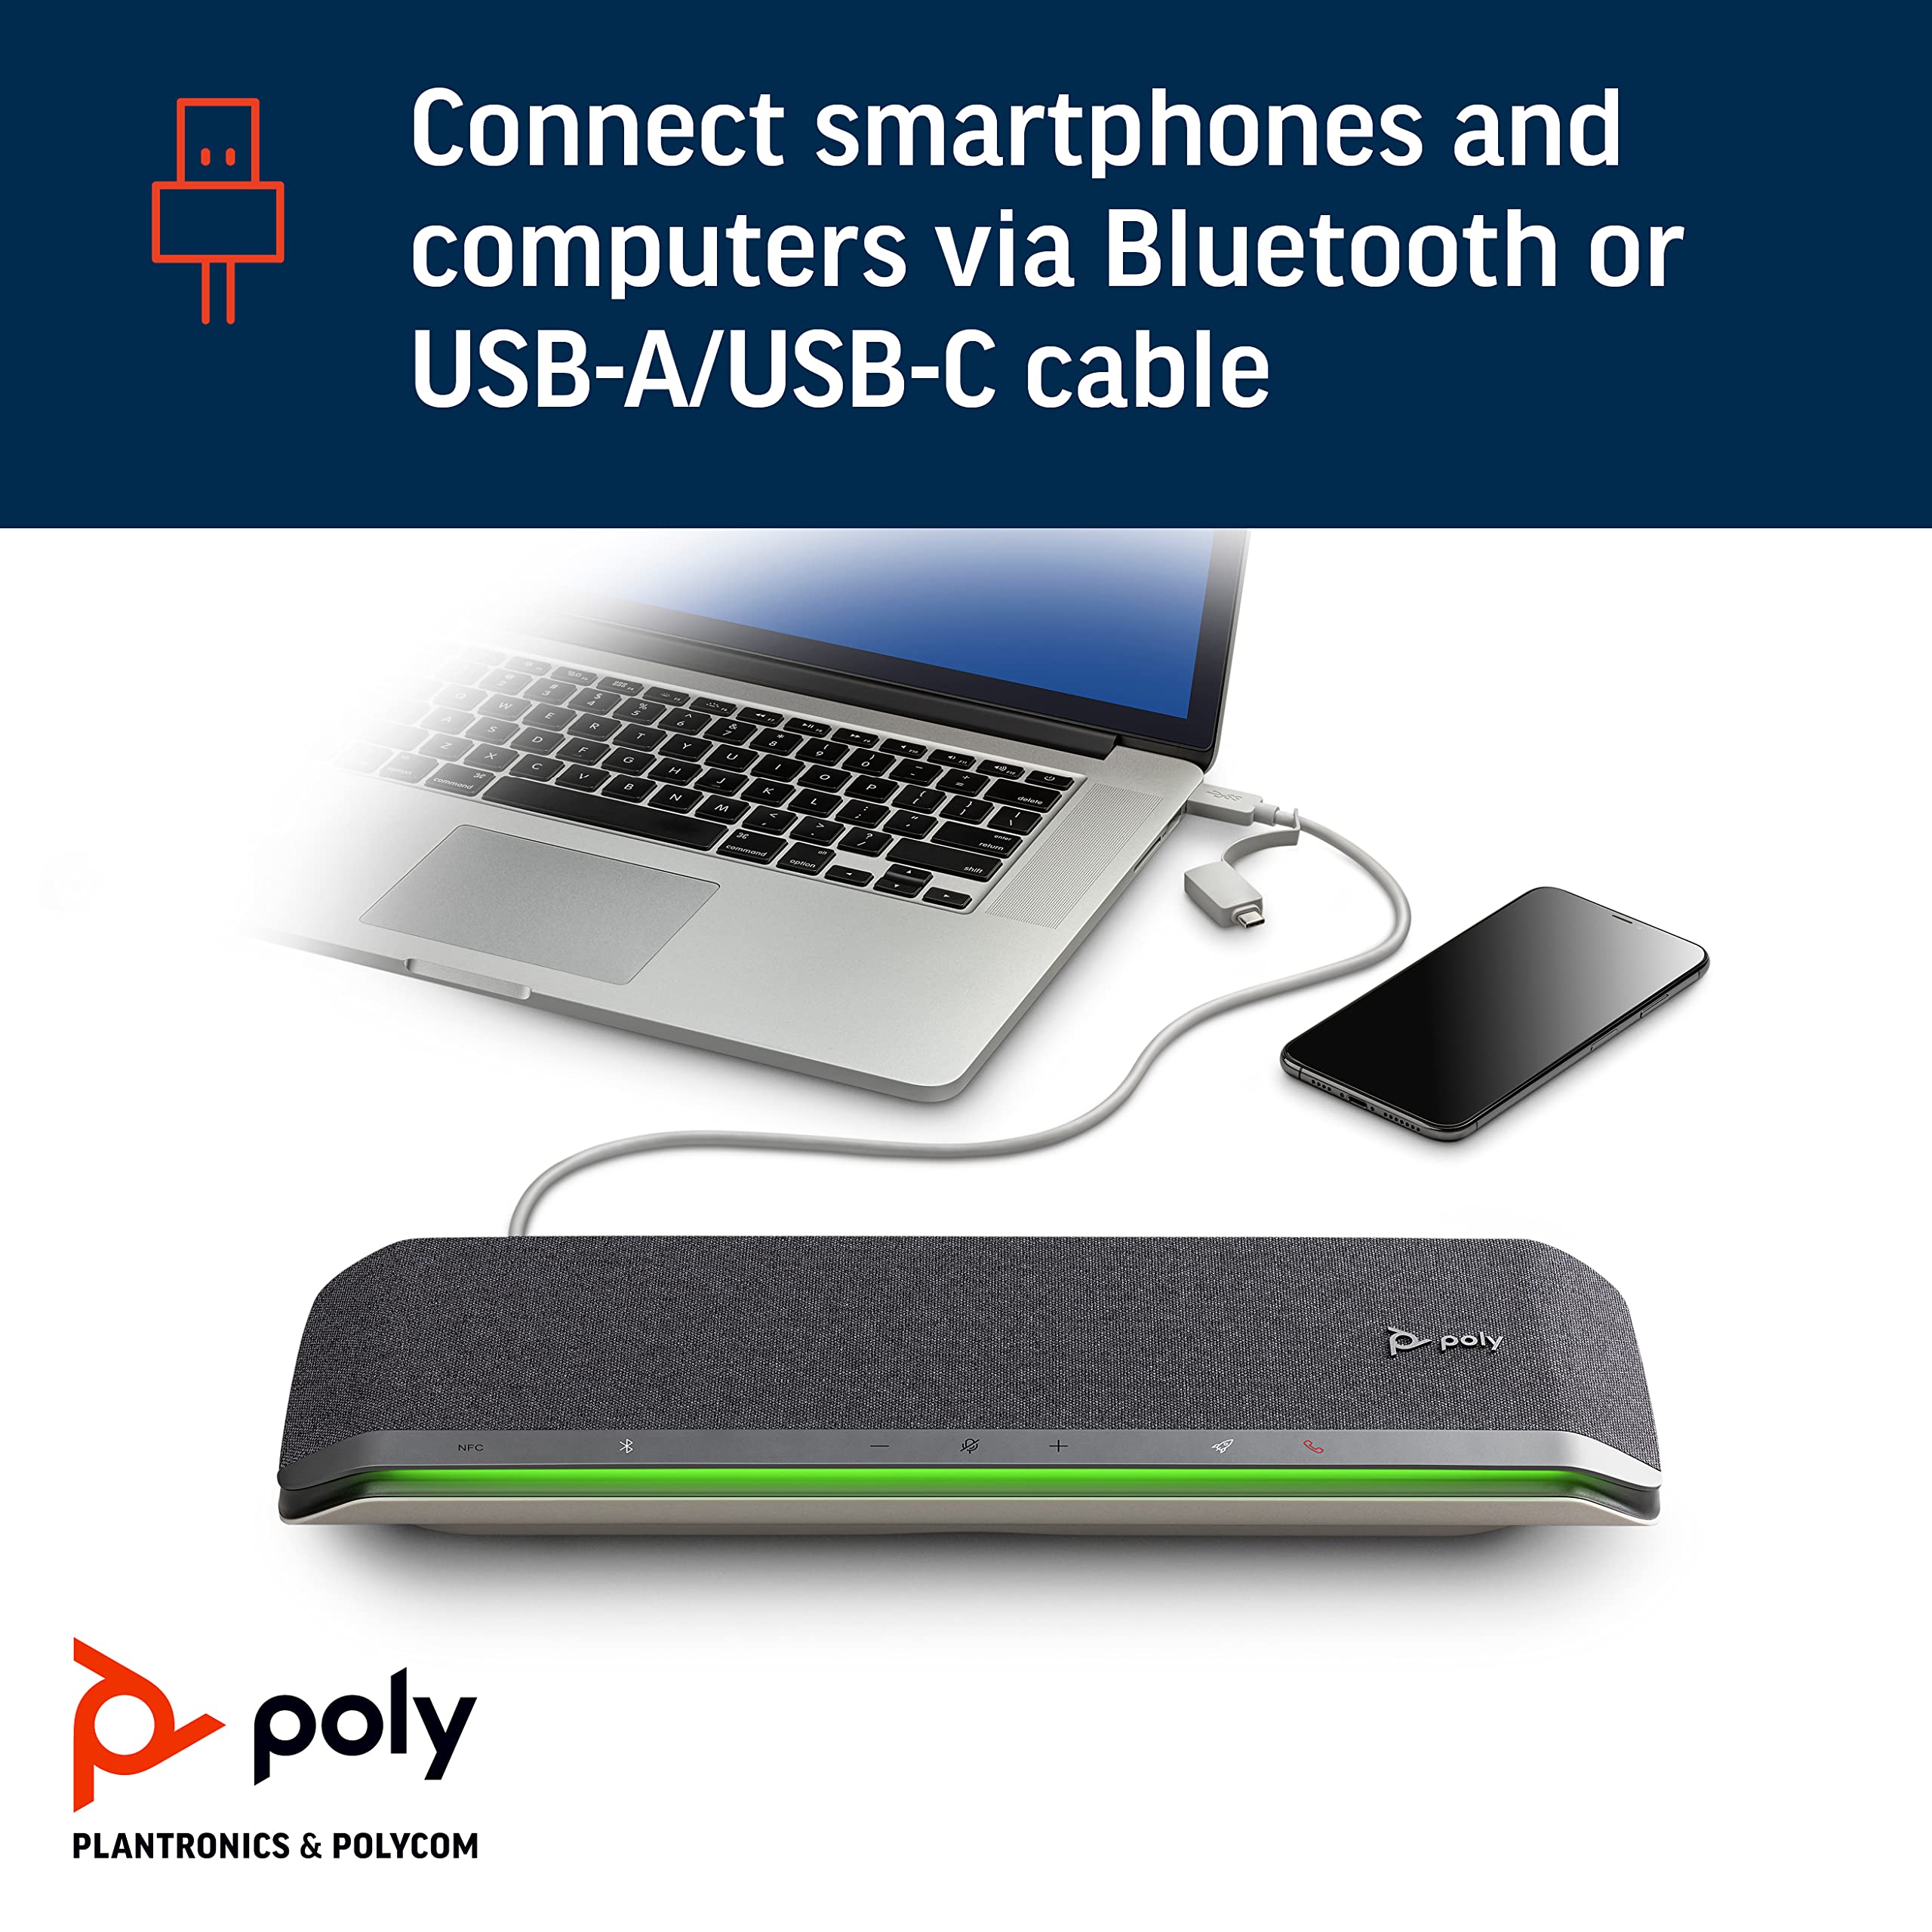 Poly - Sync 60 Smart Speakerphone for Conference Rooms (Plantronics) - Connect to PC/Mac via Combined USB-A/USB-C Cable, Smartphones via Bluetooth - Works with Teams (Certified), Zoom & More